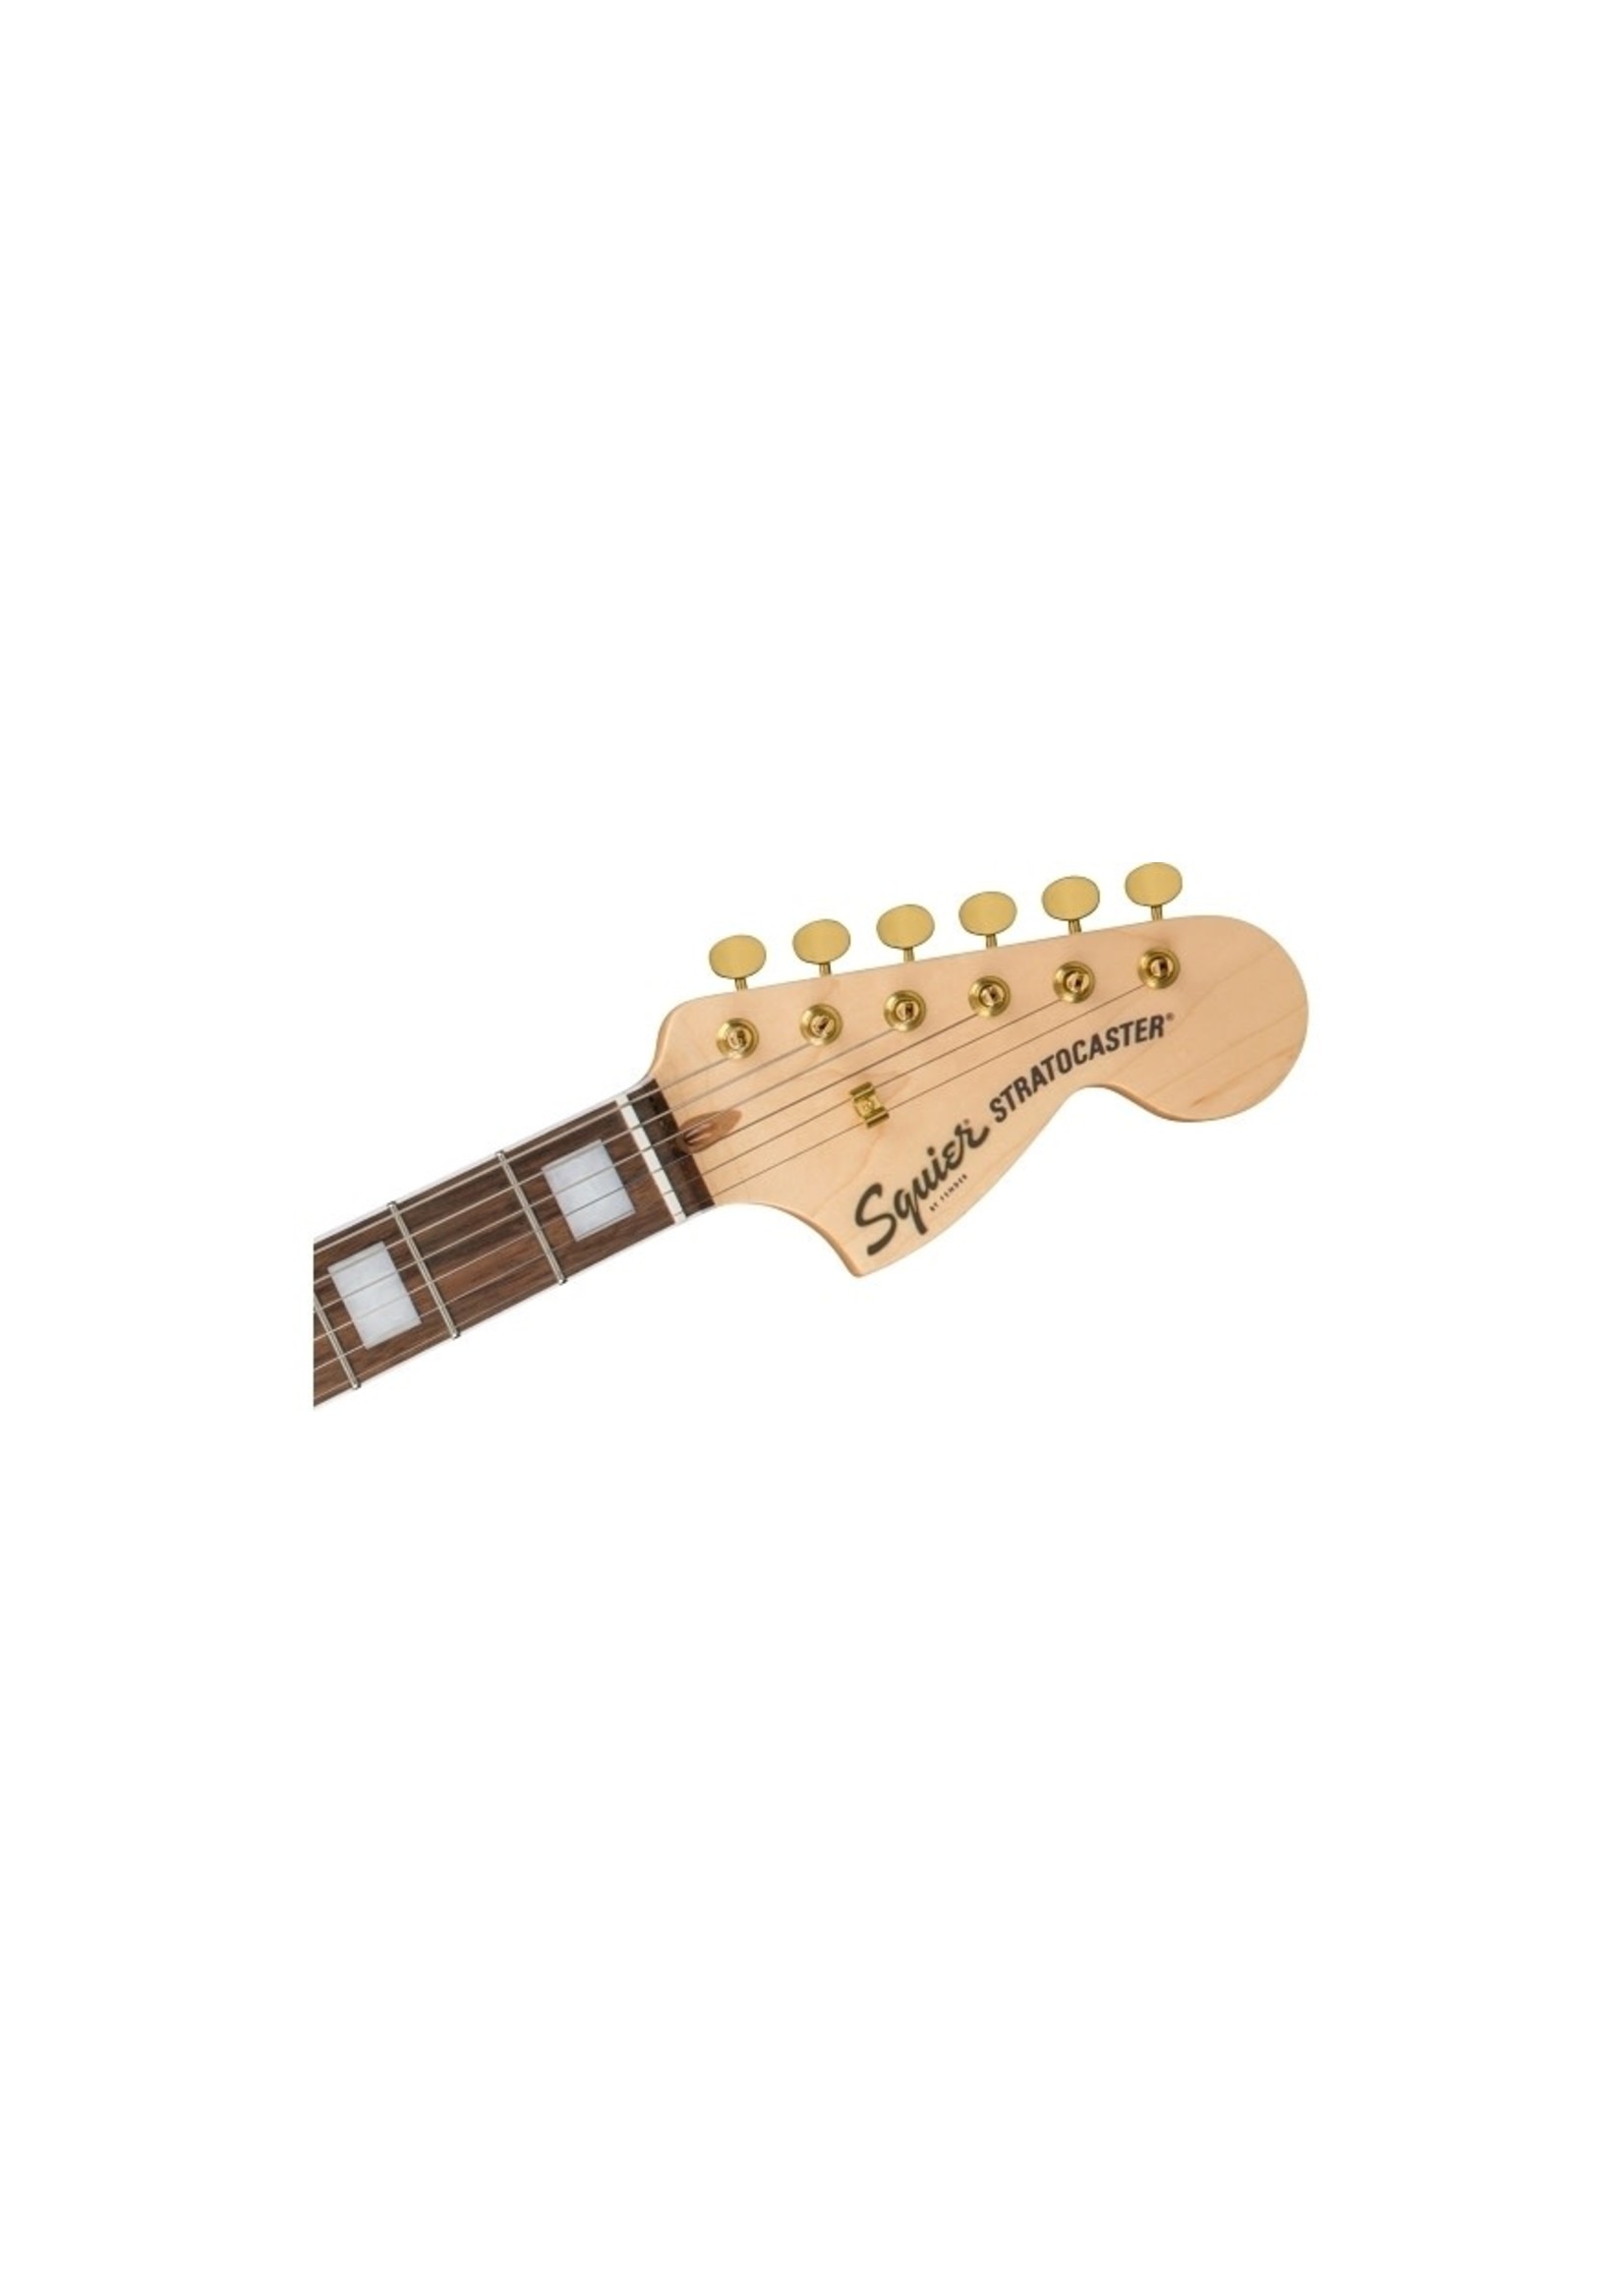 Squier Squier 0379410515 40th Anniversary Stratocaster, Gold Edition, Laurel Fingerboard, Gold Anodized Pickguard, Ruby Red Metallic